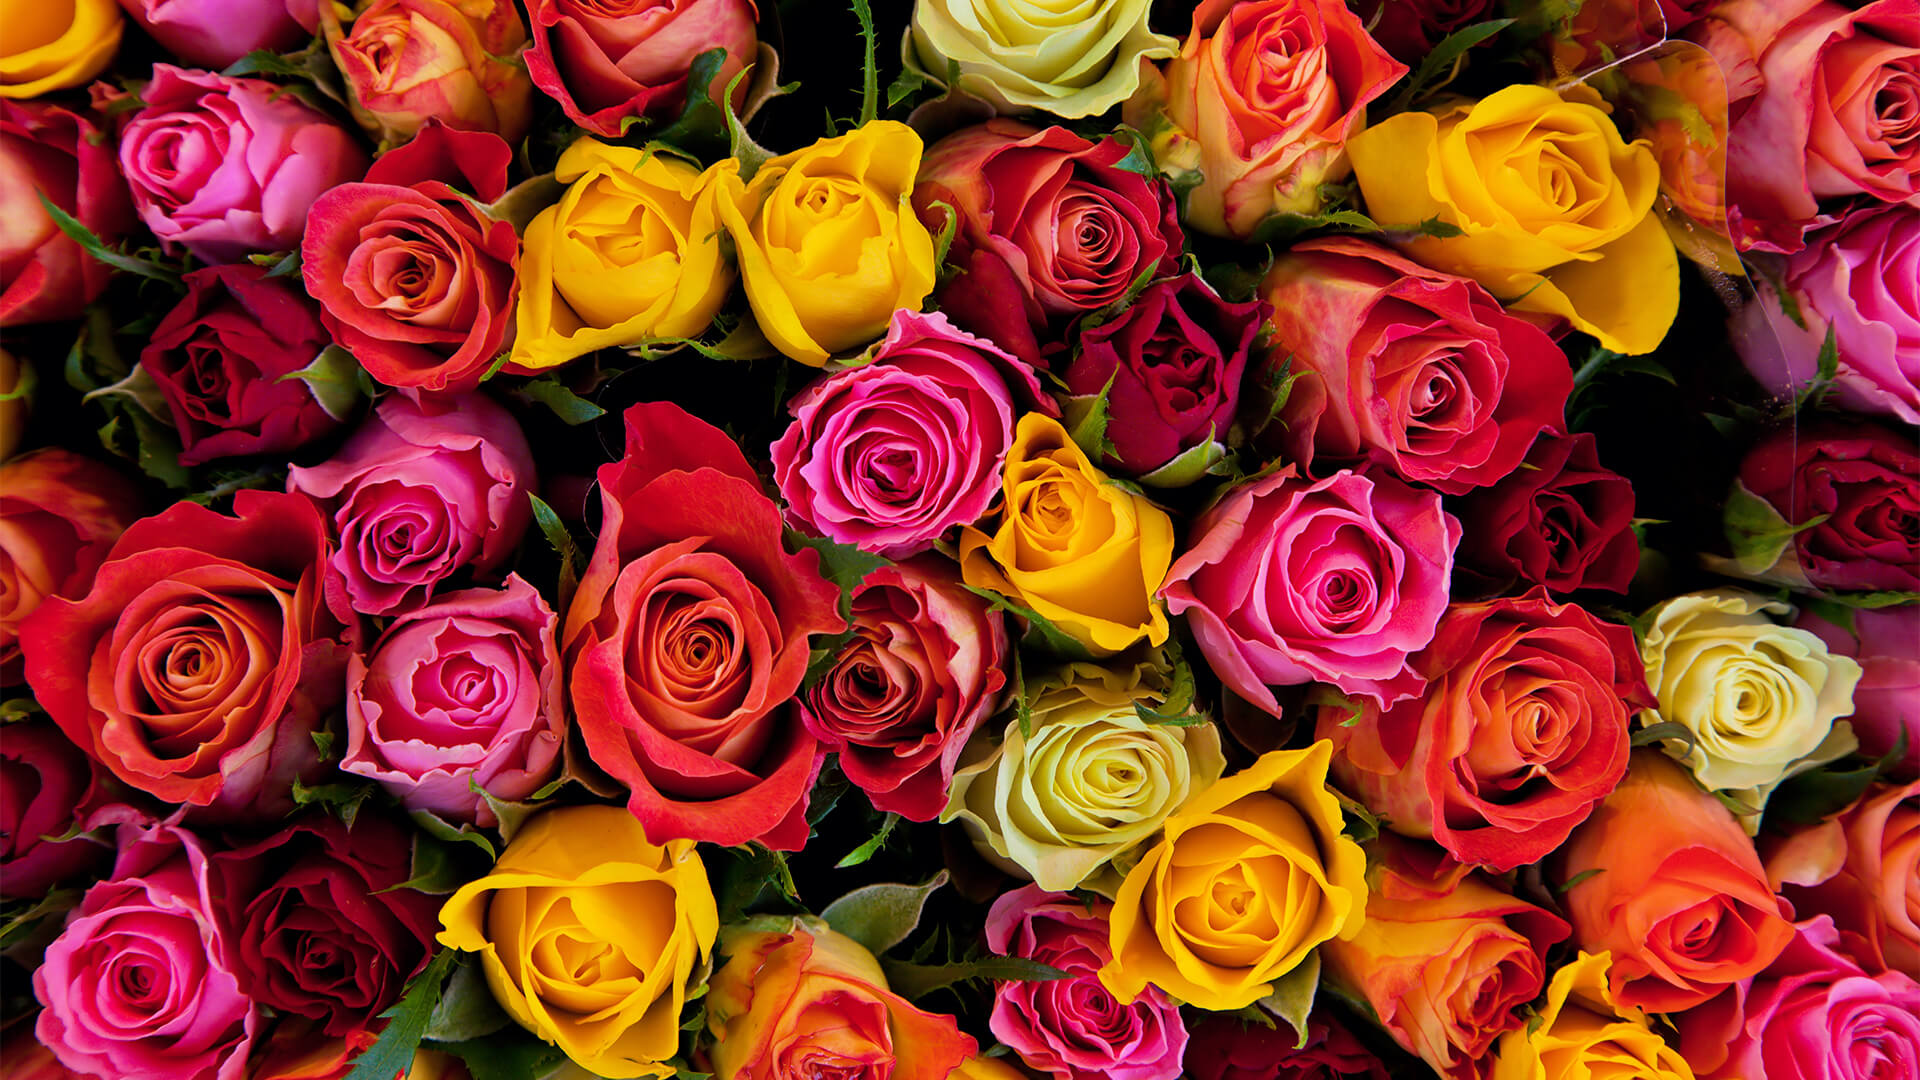 Yellow, orange, pink, and red roses